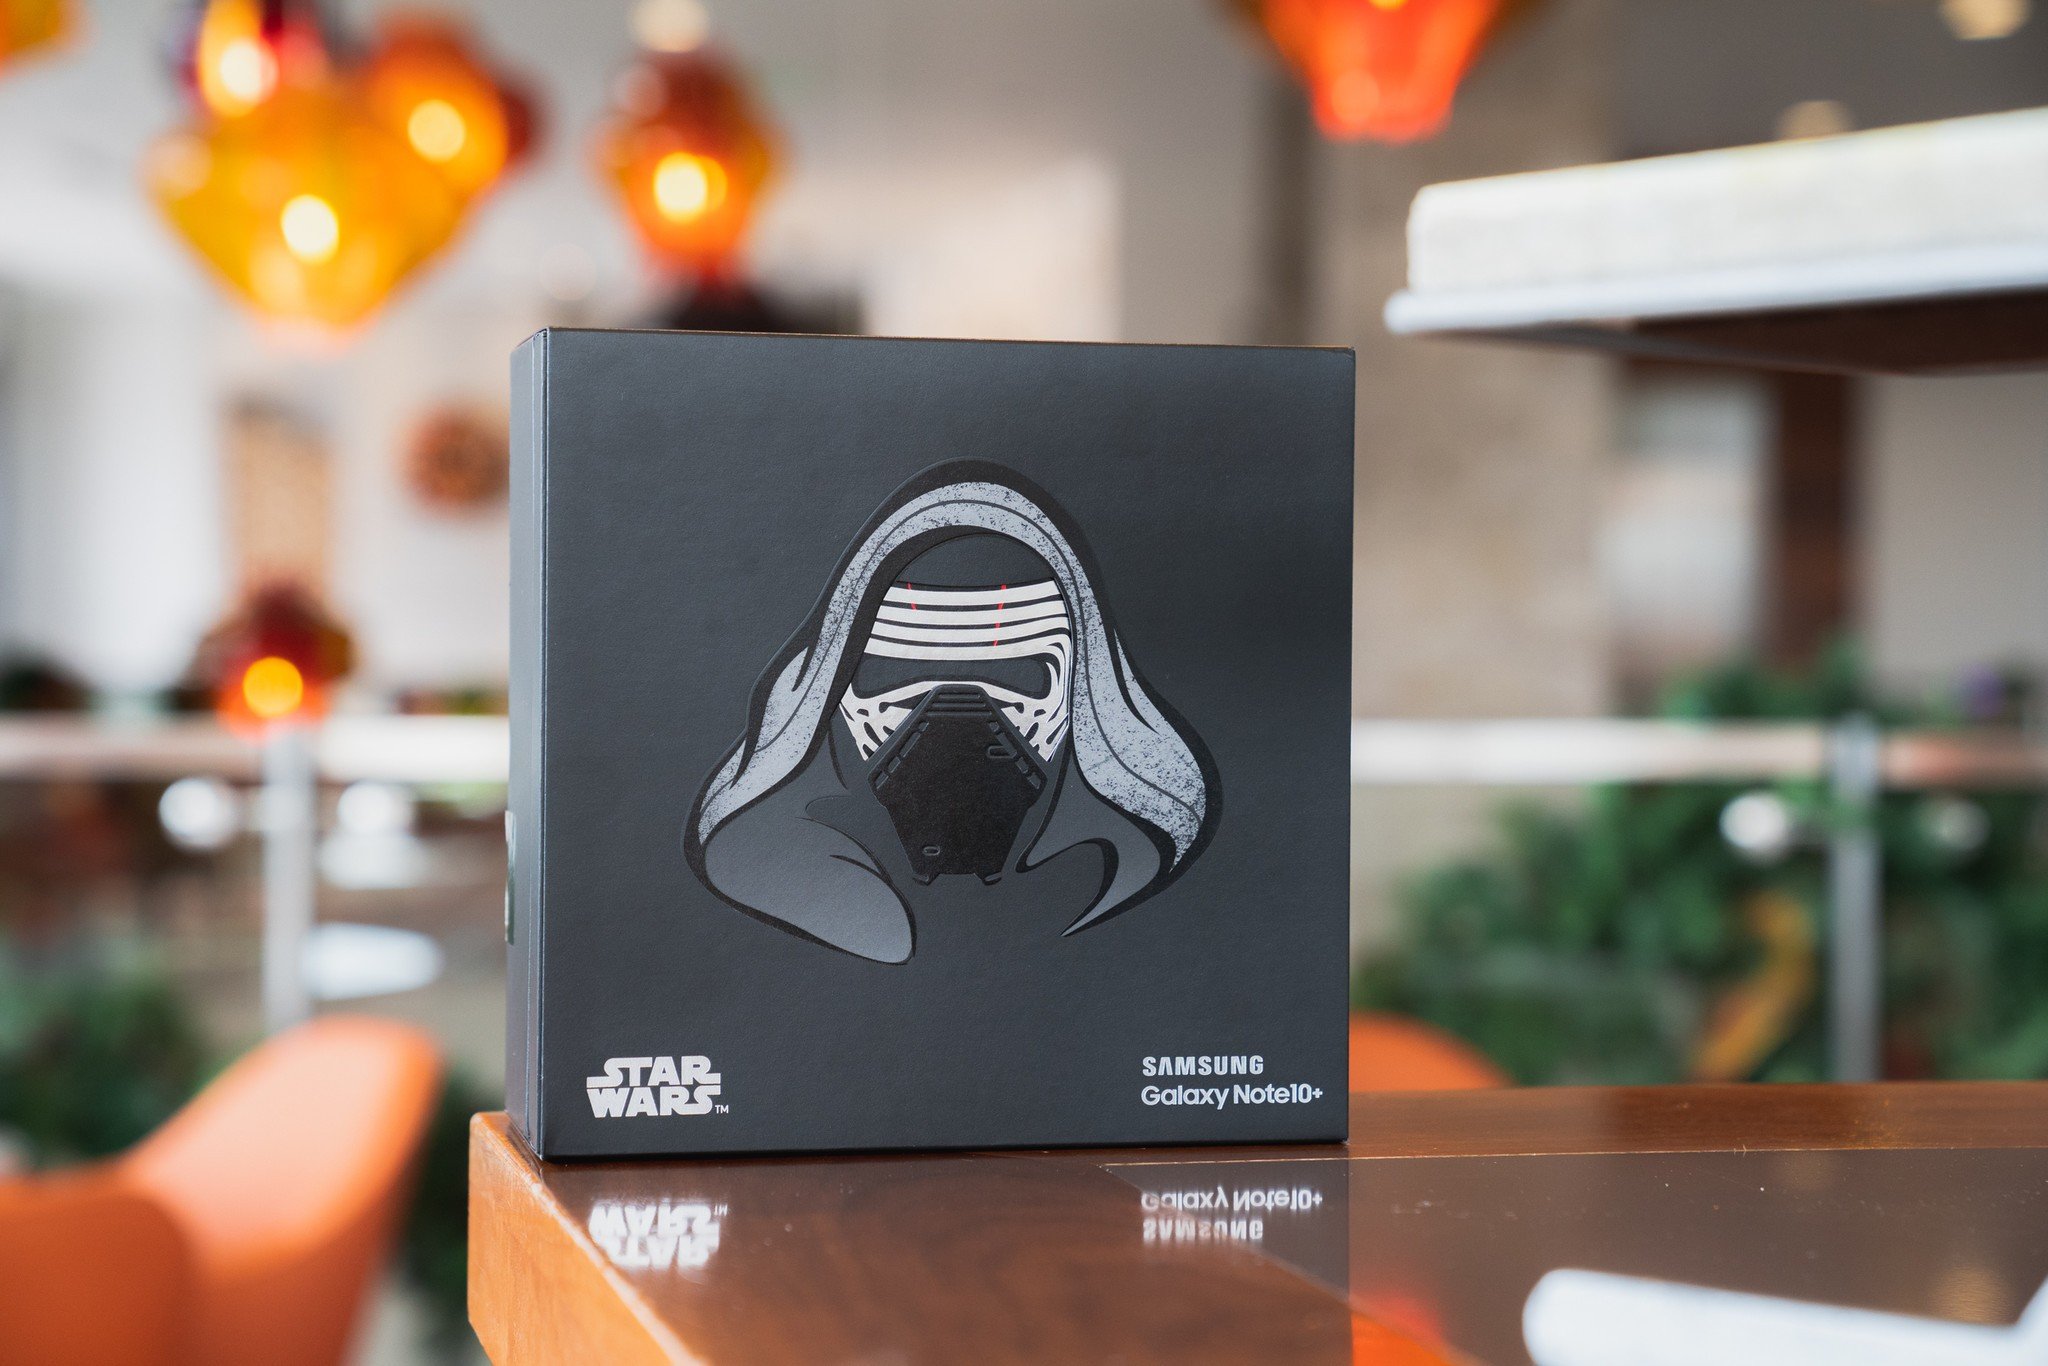 Galaxy Note 10+ Star Wars Edition packaging